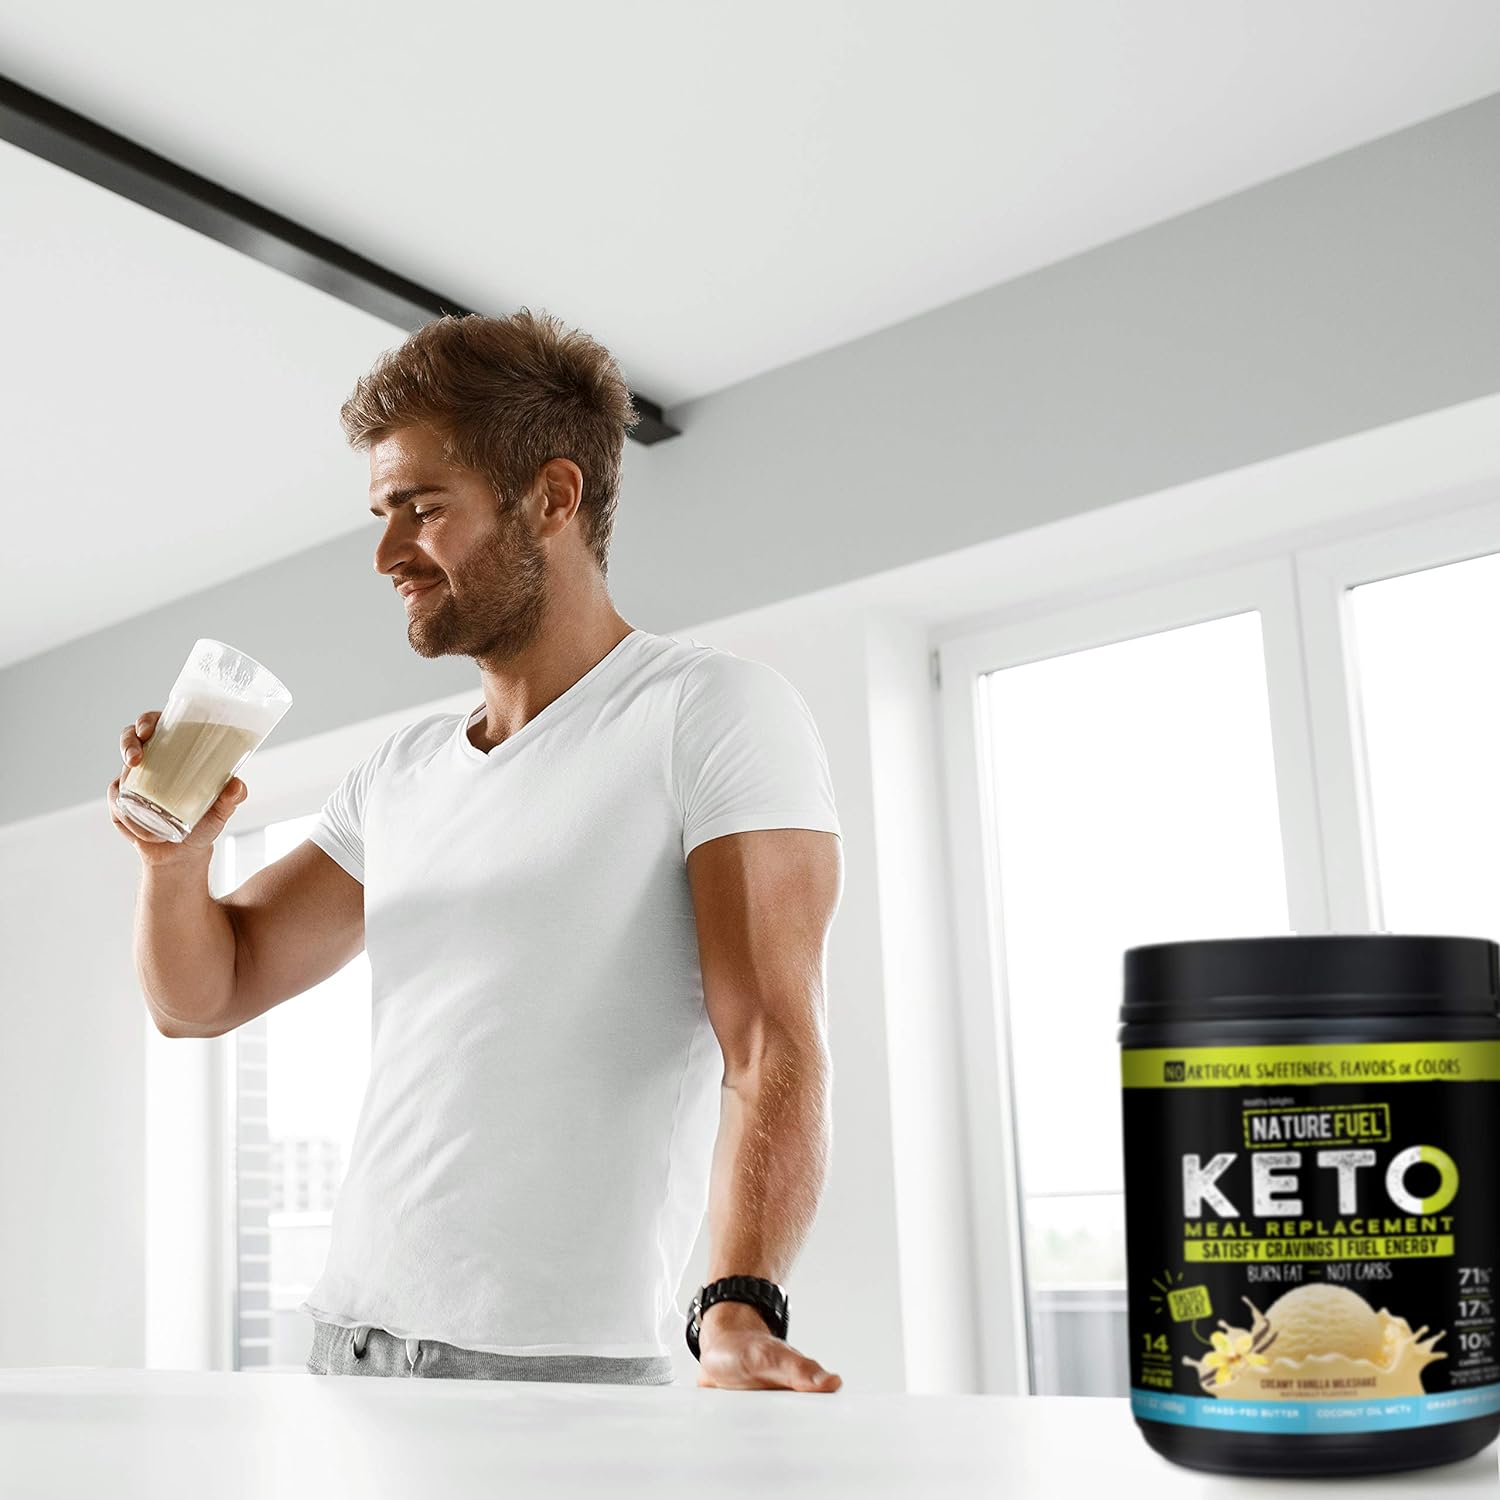 Nature Fuel Keto Meal Replacement Powder - Gluten Free with Coconut Oil MCTs and Grass-Fed Butter - Creamy Vanilla Milkshake - 14 Servings - Pantry Friendly, 17.1 Fl Oz : Health & Household